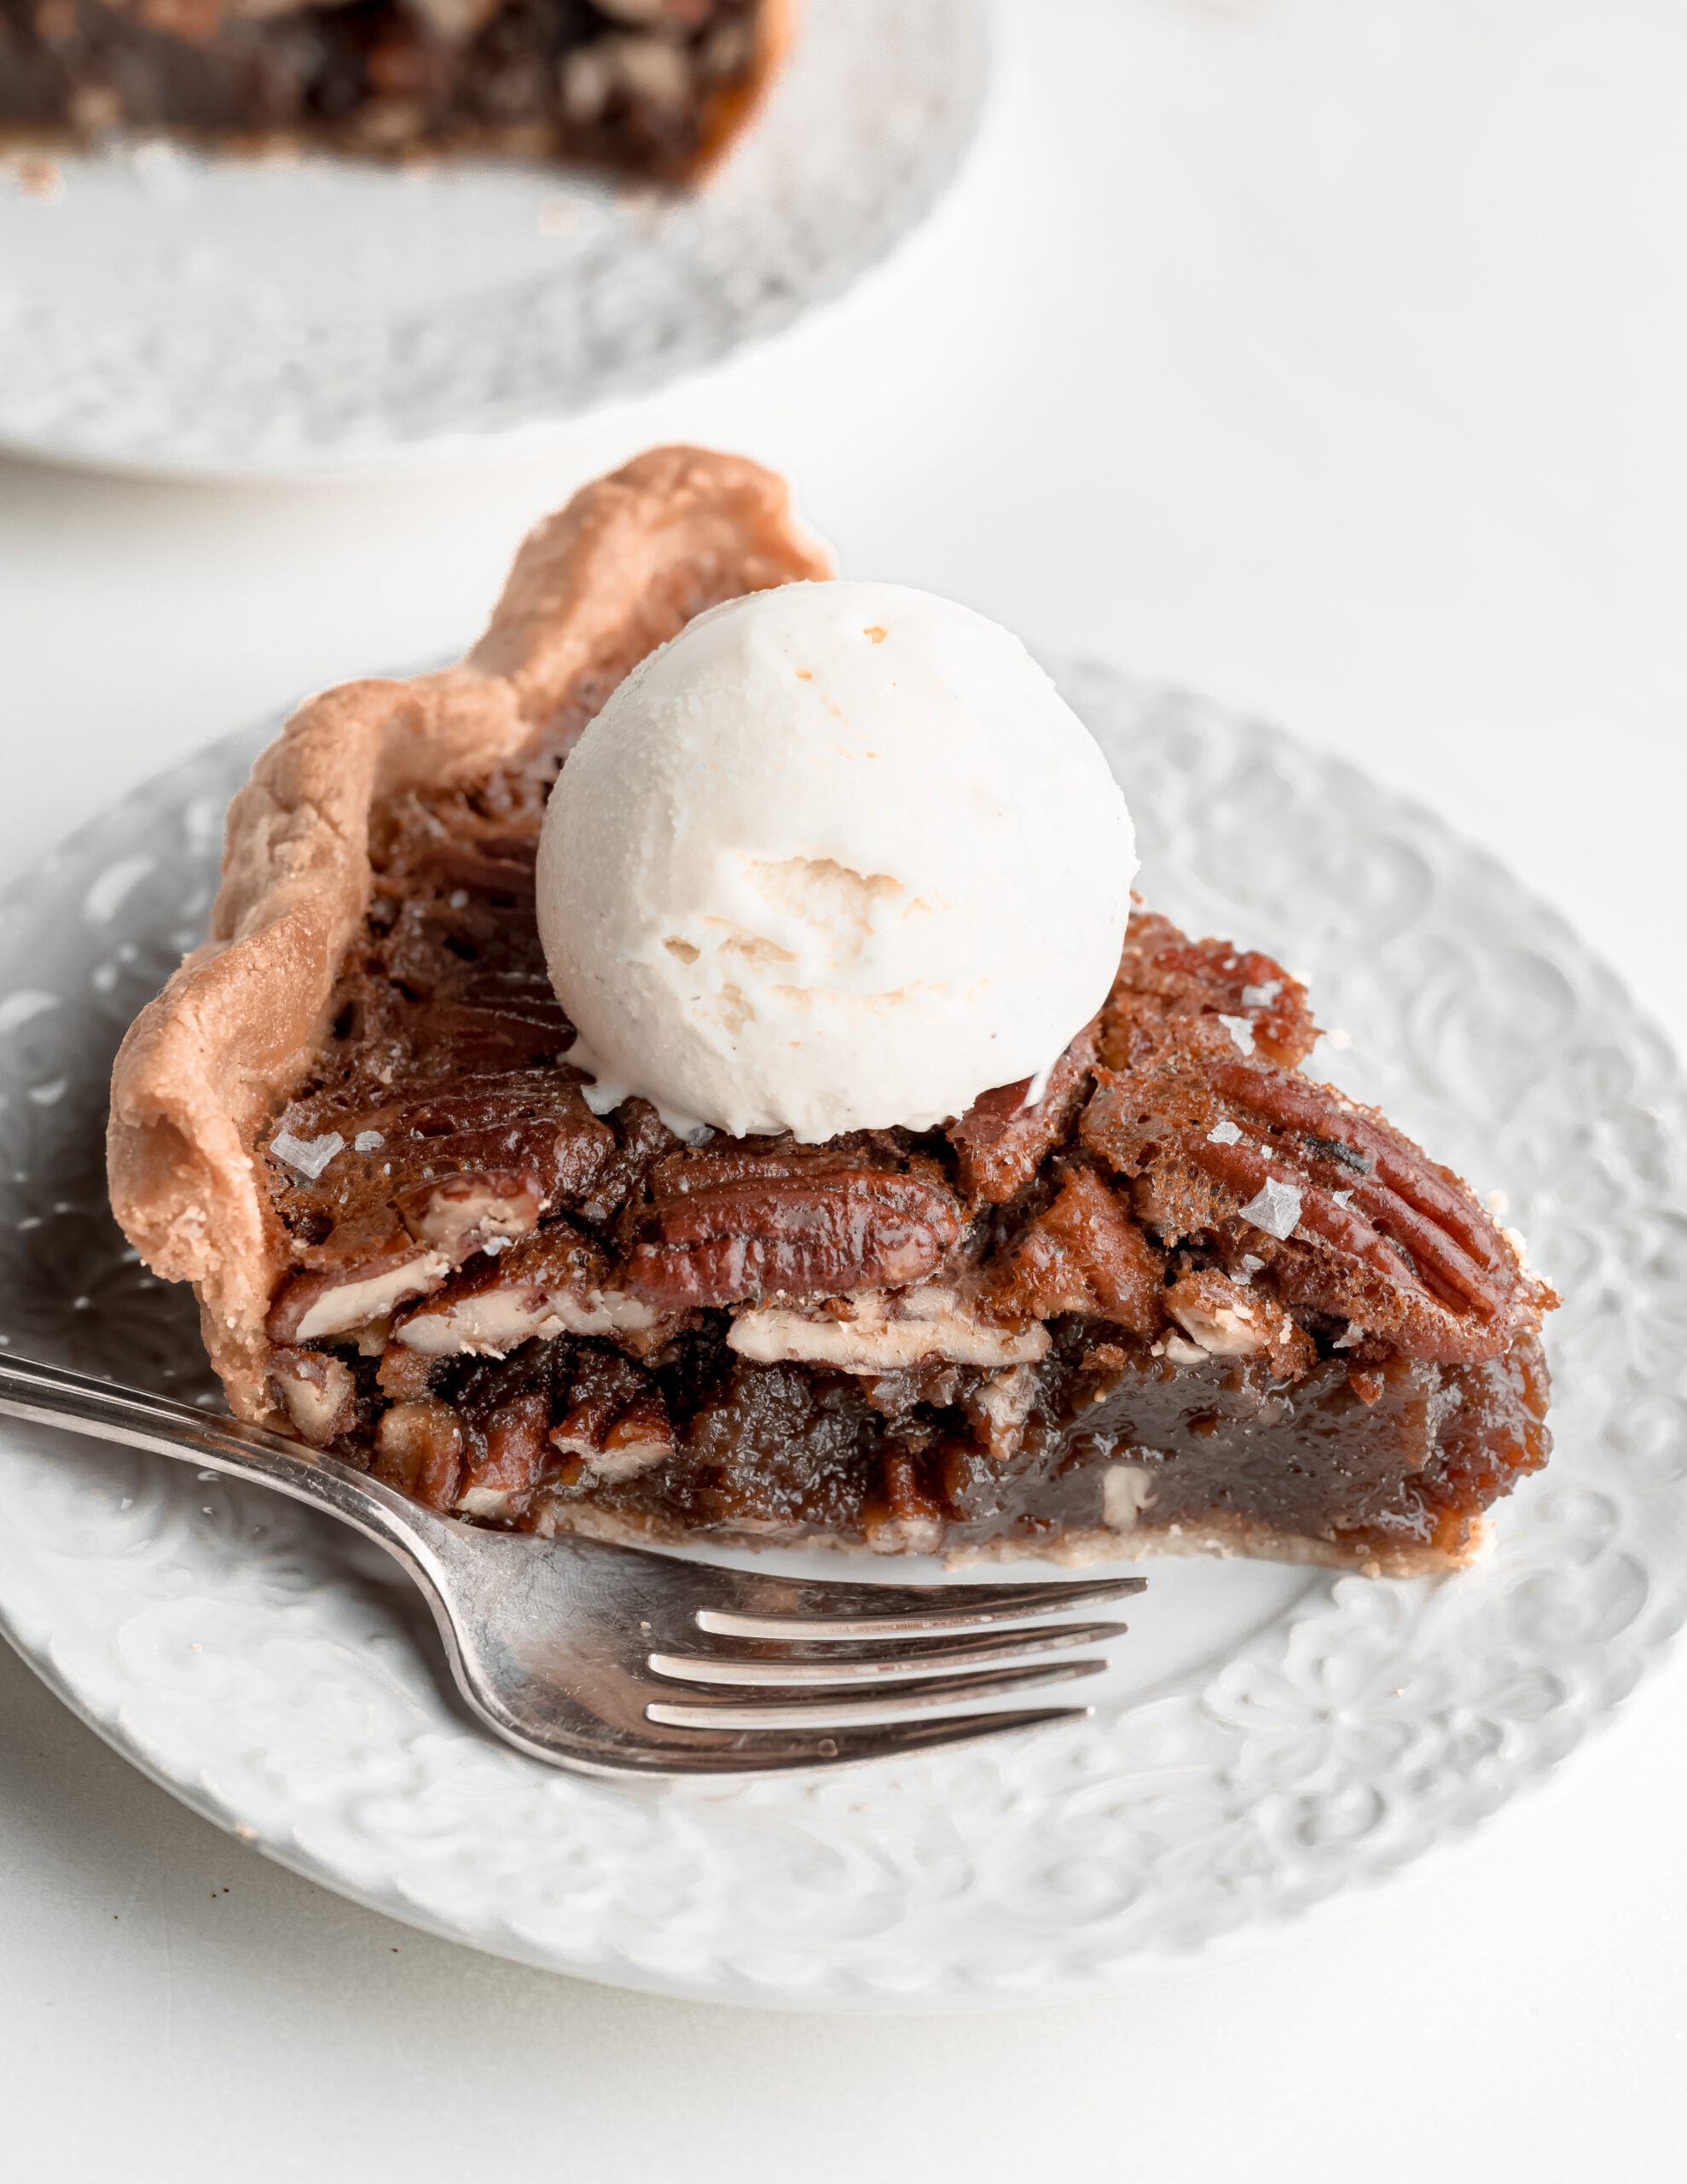 A large picture of a piece of pecan pie on a ceramaic white plate with vanilla ice cream on top.